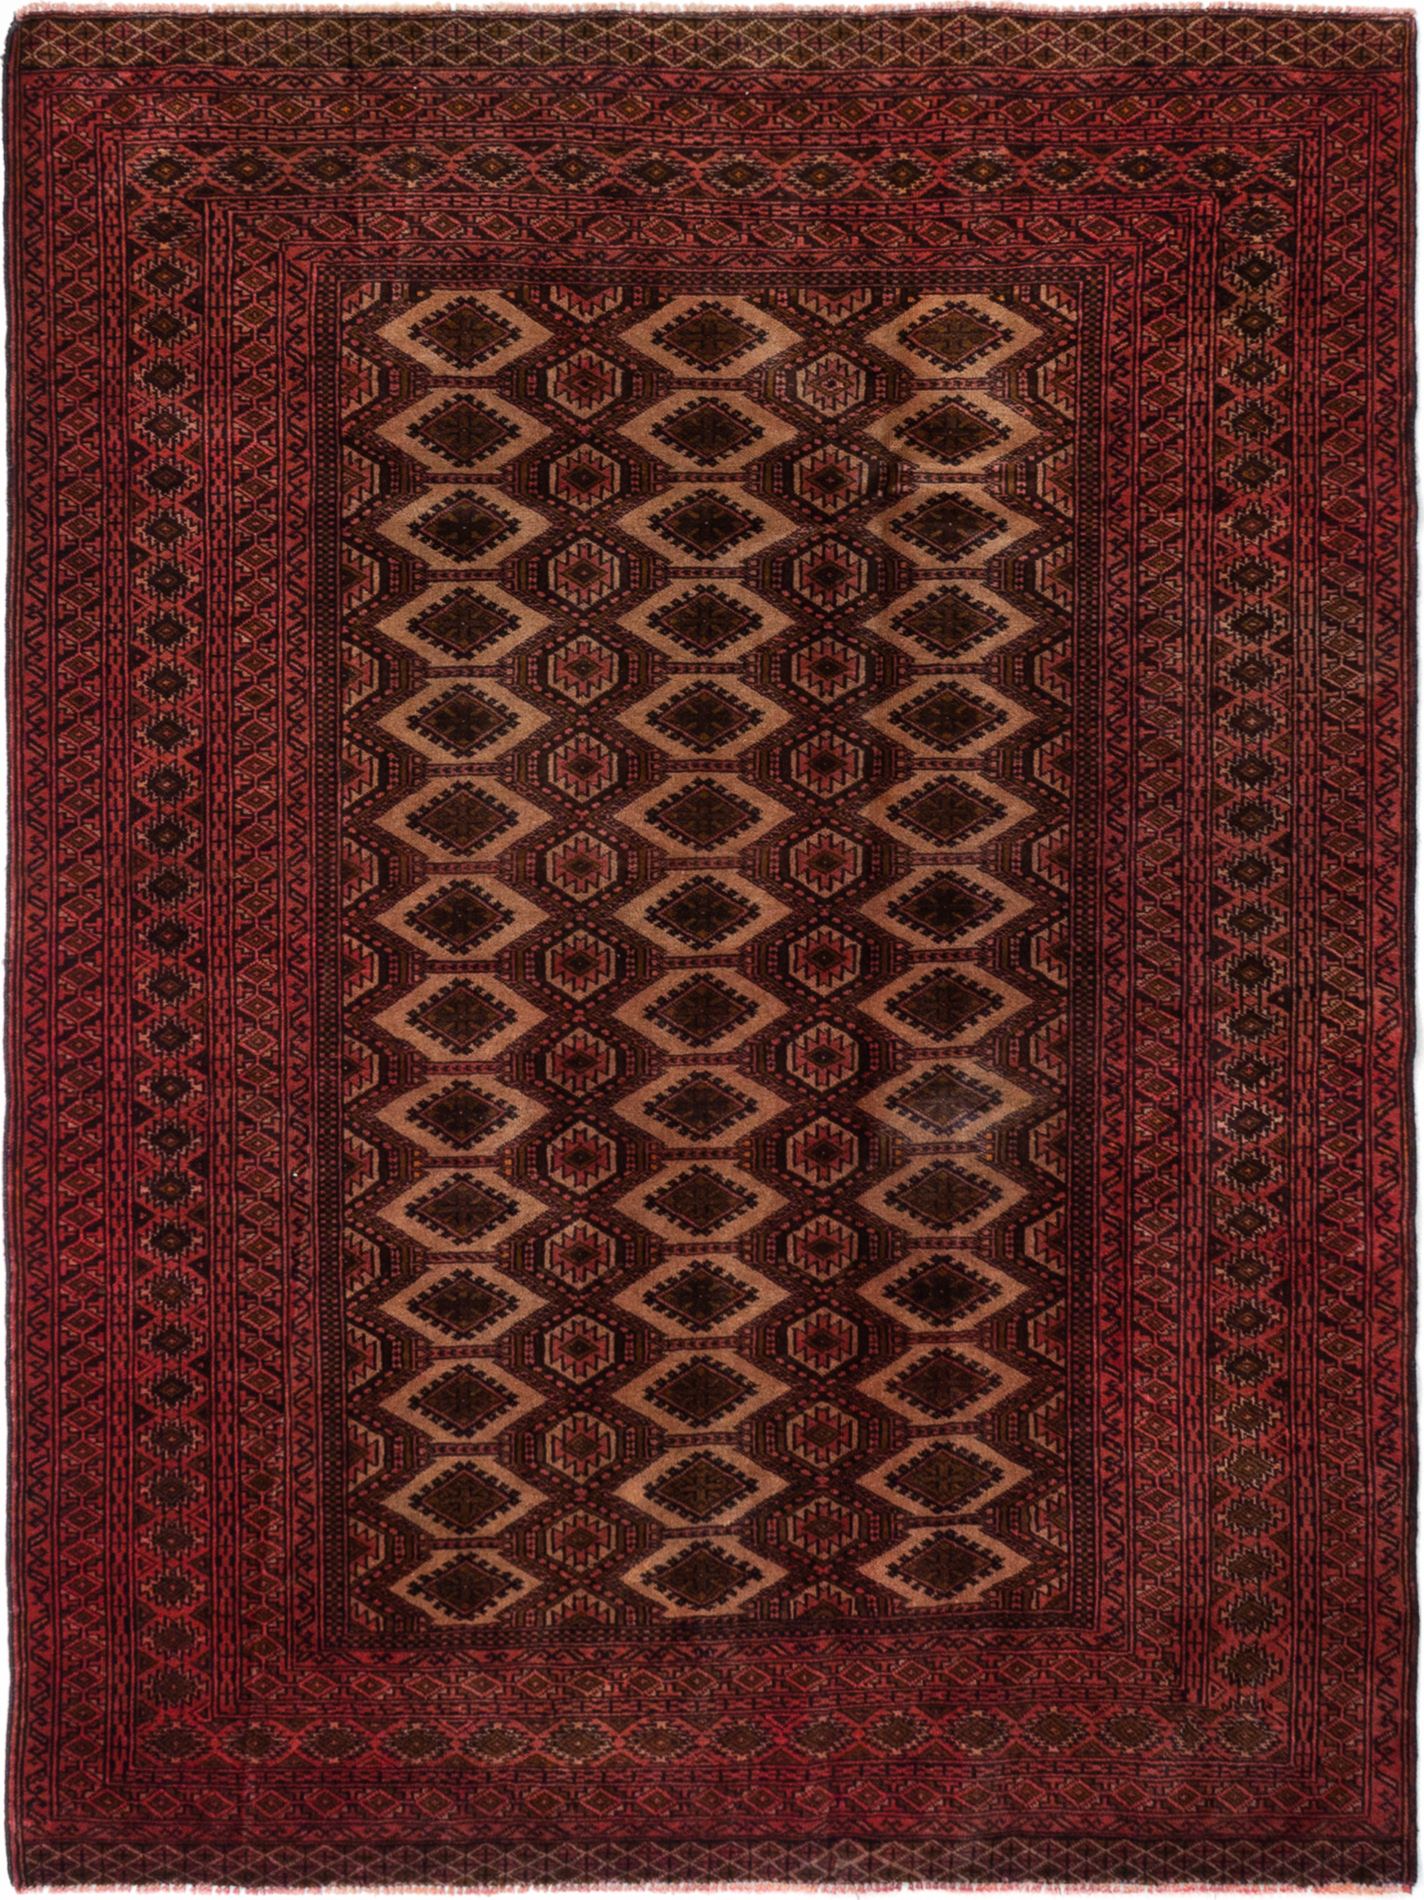 Hand-knotted Royal Baluch Dark Copper, Tan Wool Rug 4'3" x 5'8" Size: 4'3" x 5'8"  